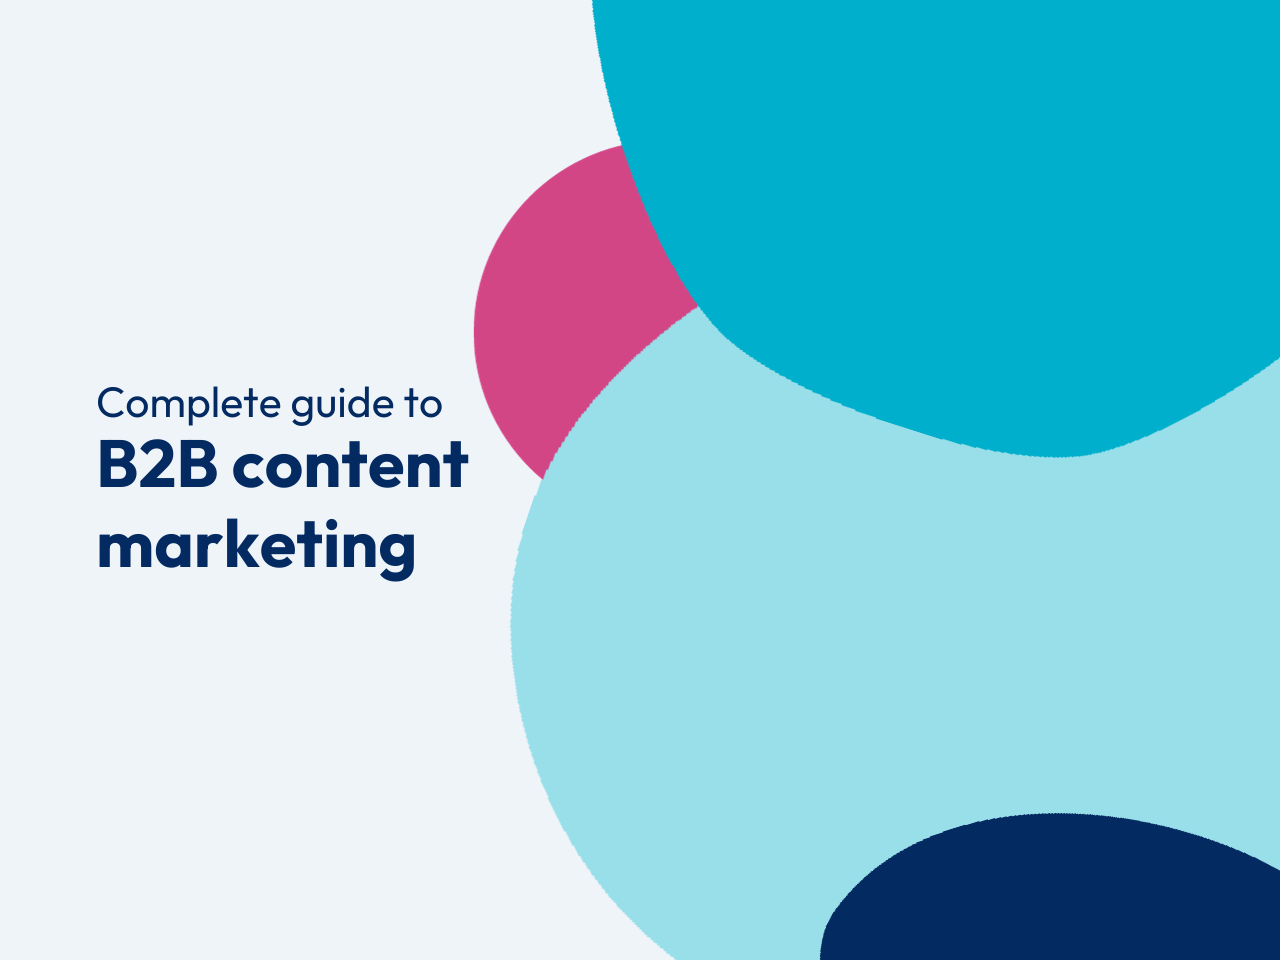 Feature image for Turtl pillar post called Complete guide to b2b content marketing